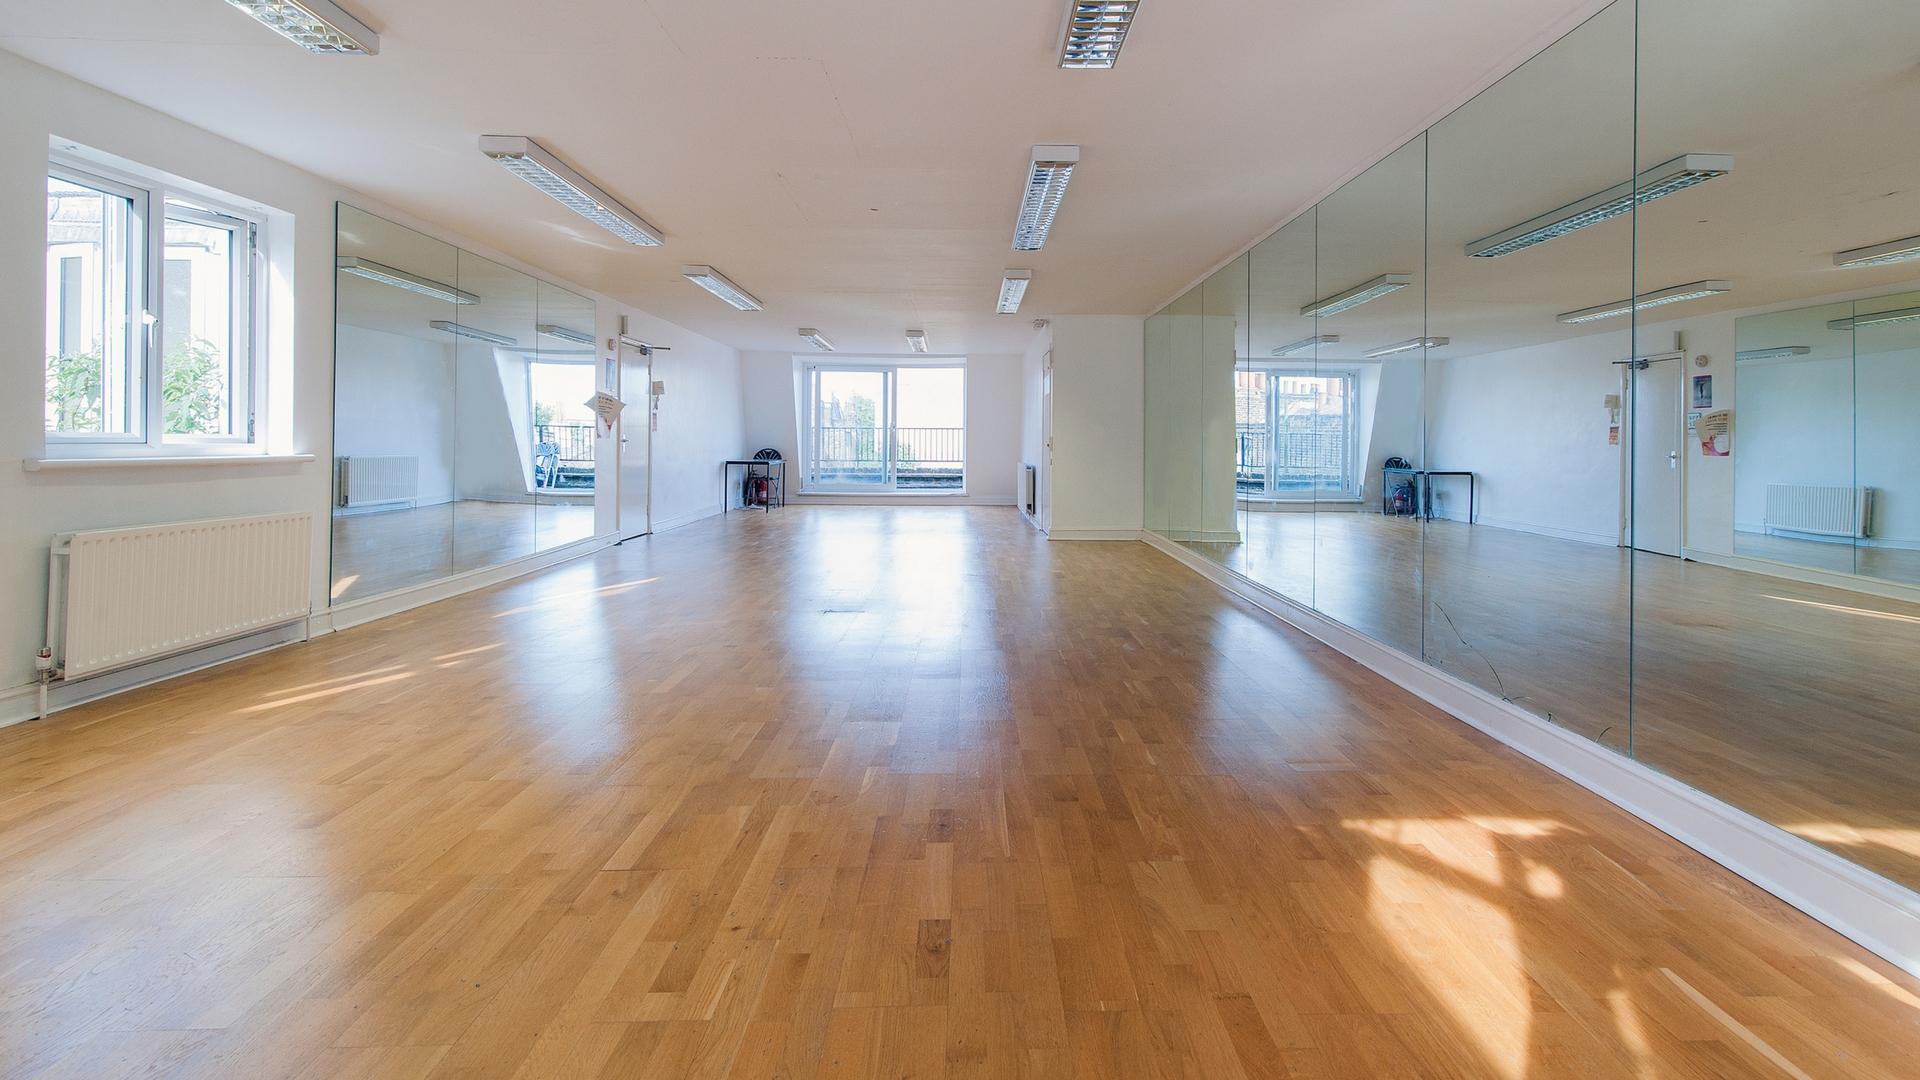 Yoga Studios for Hire in London